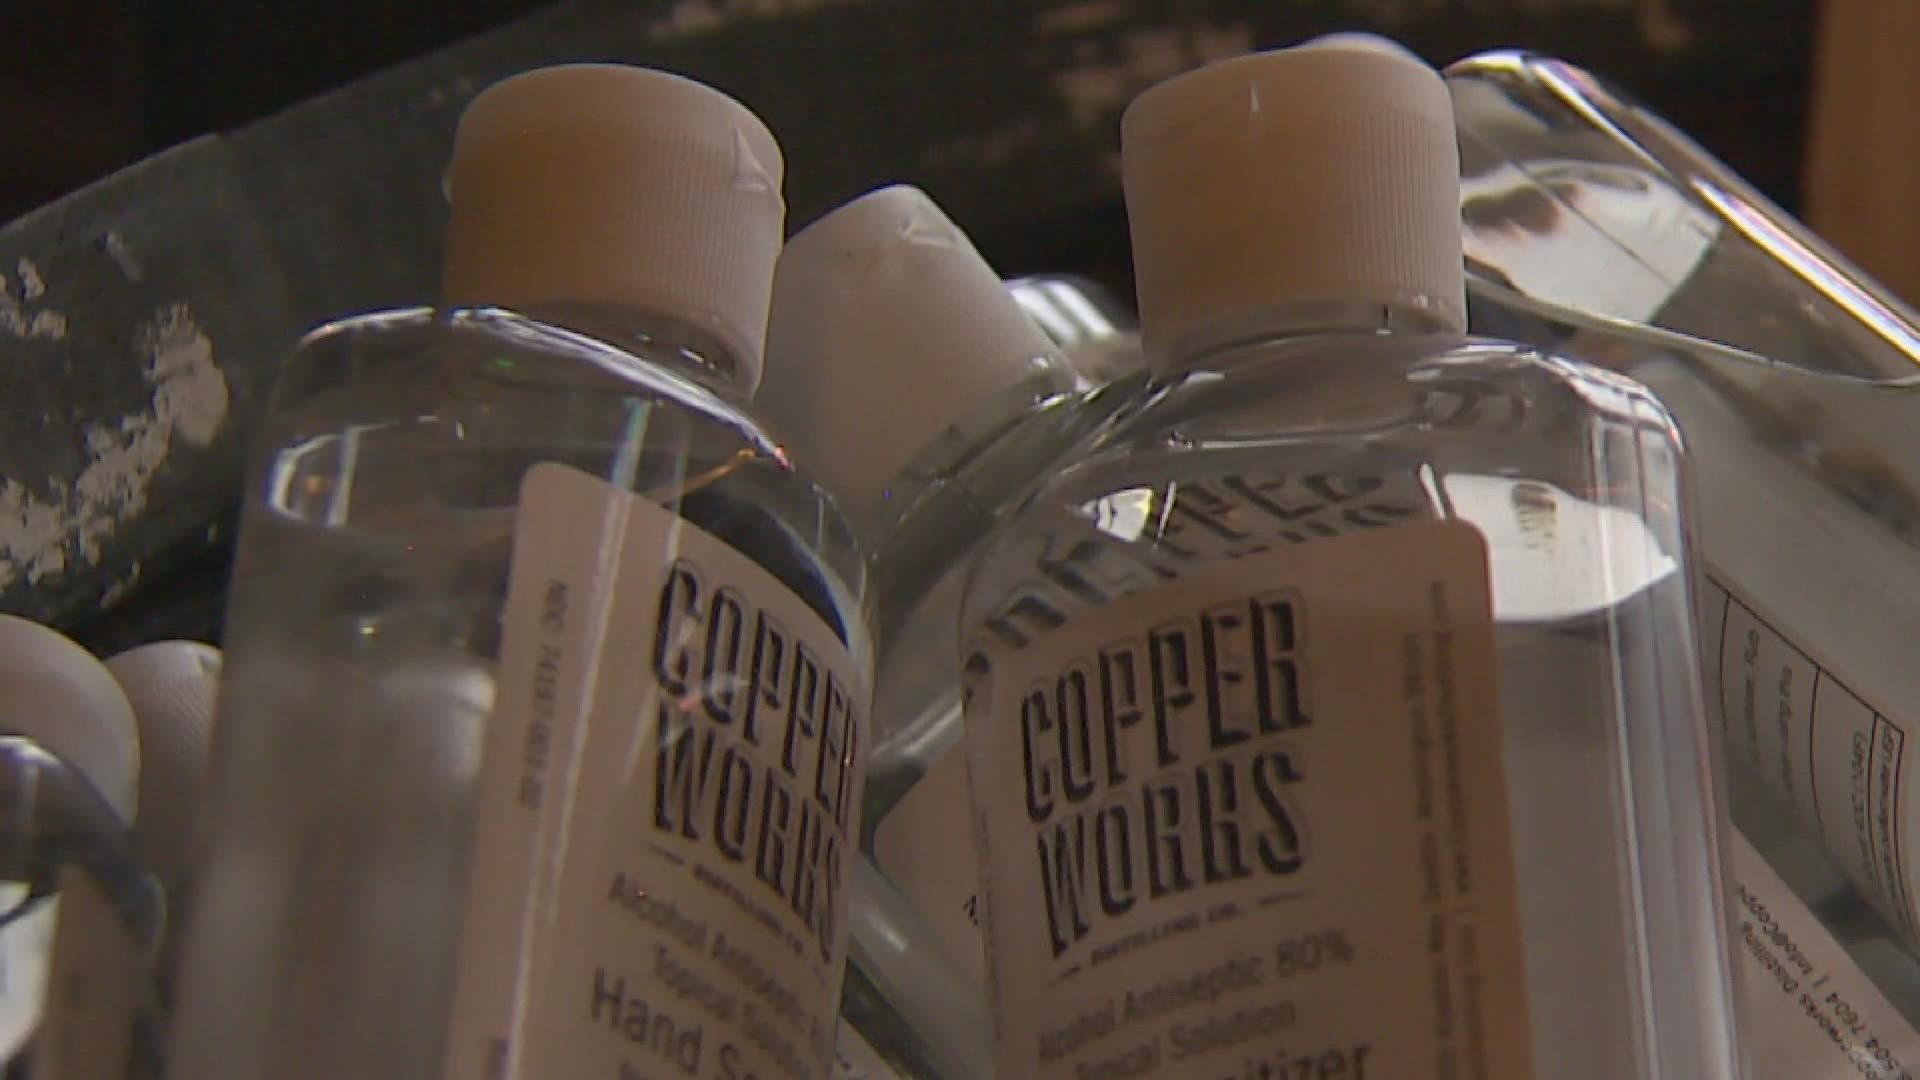 Copperworks Distilling Co., which made thousands of bottles of hand sanitizer during the pandemic, is trying to distribute free leftovers.